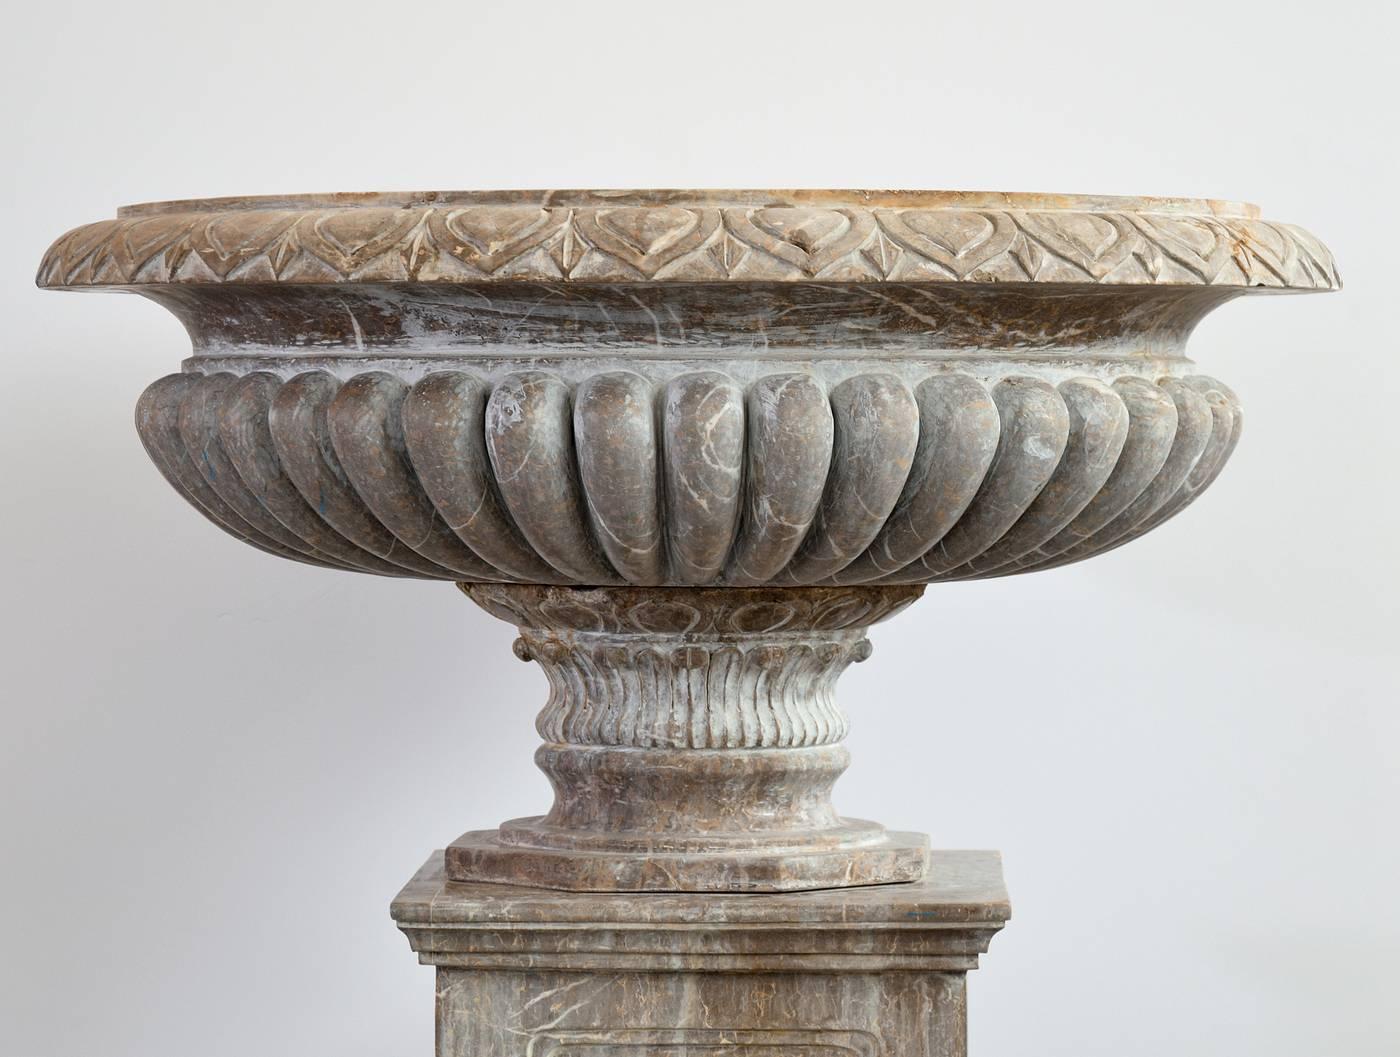 Hand-carved in Italy, this monumental brown marble planter measures 50